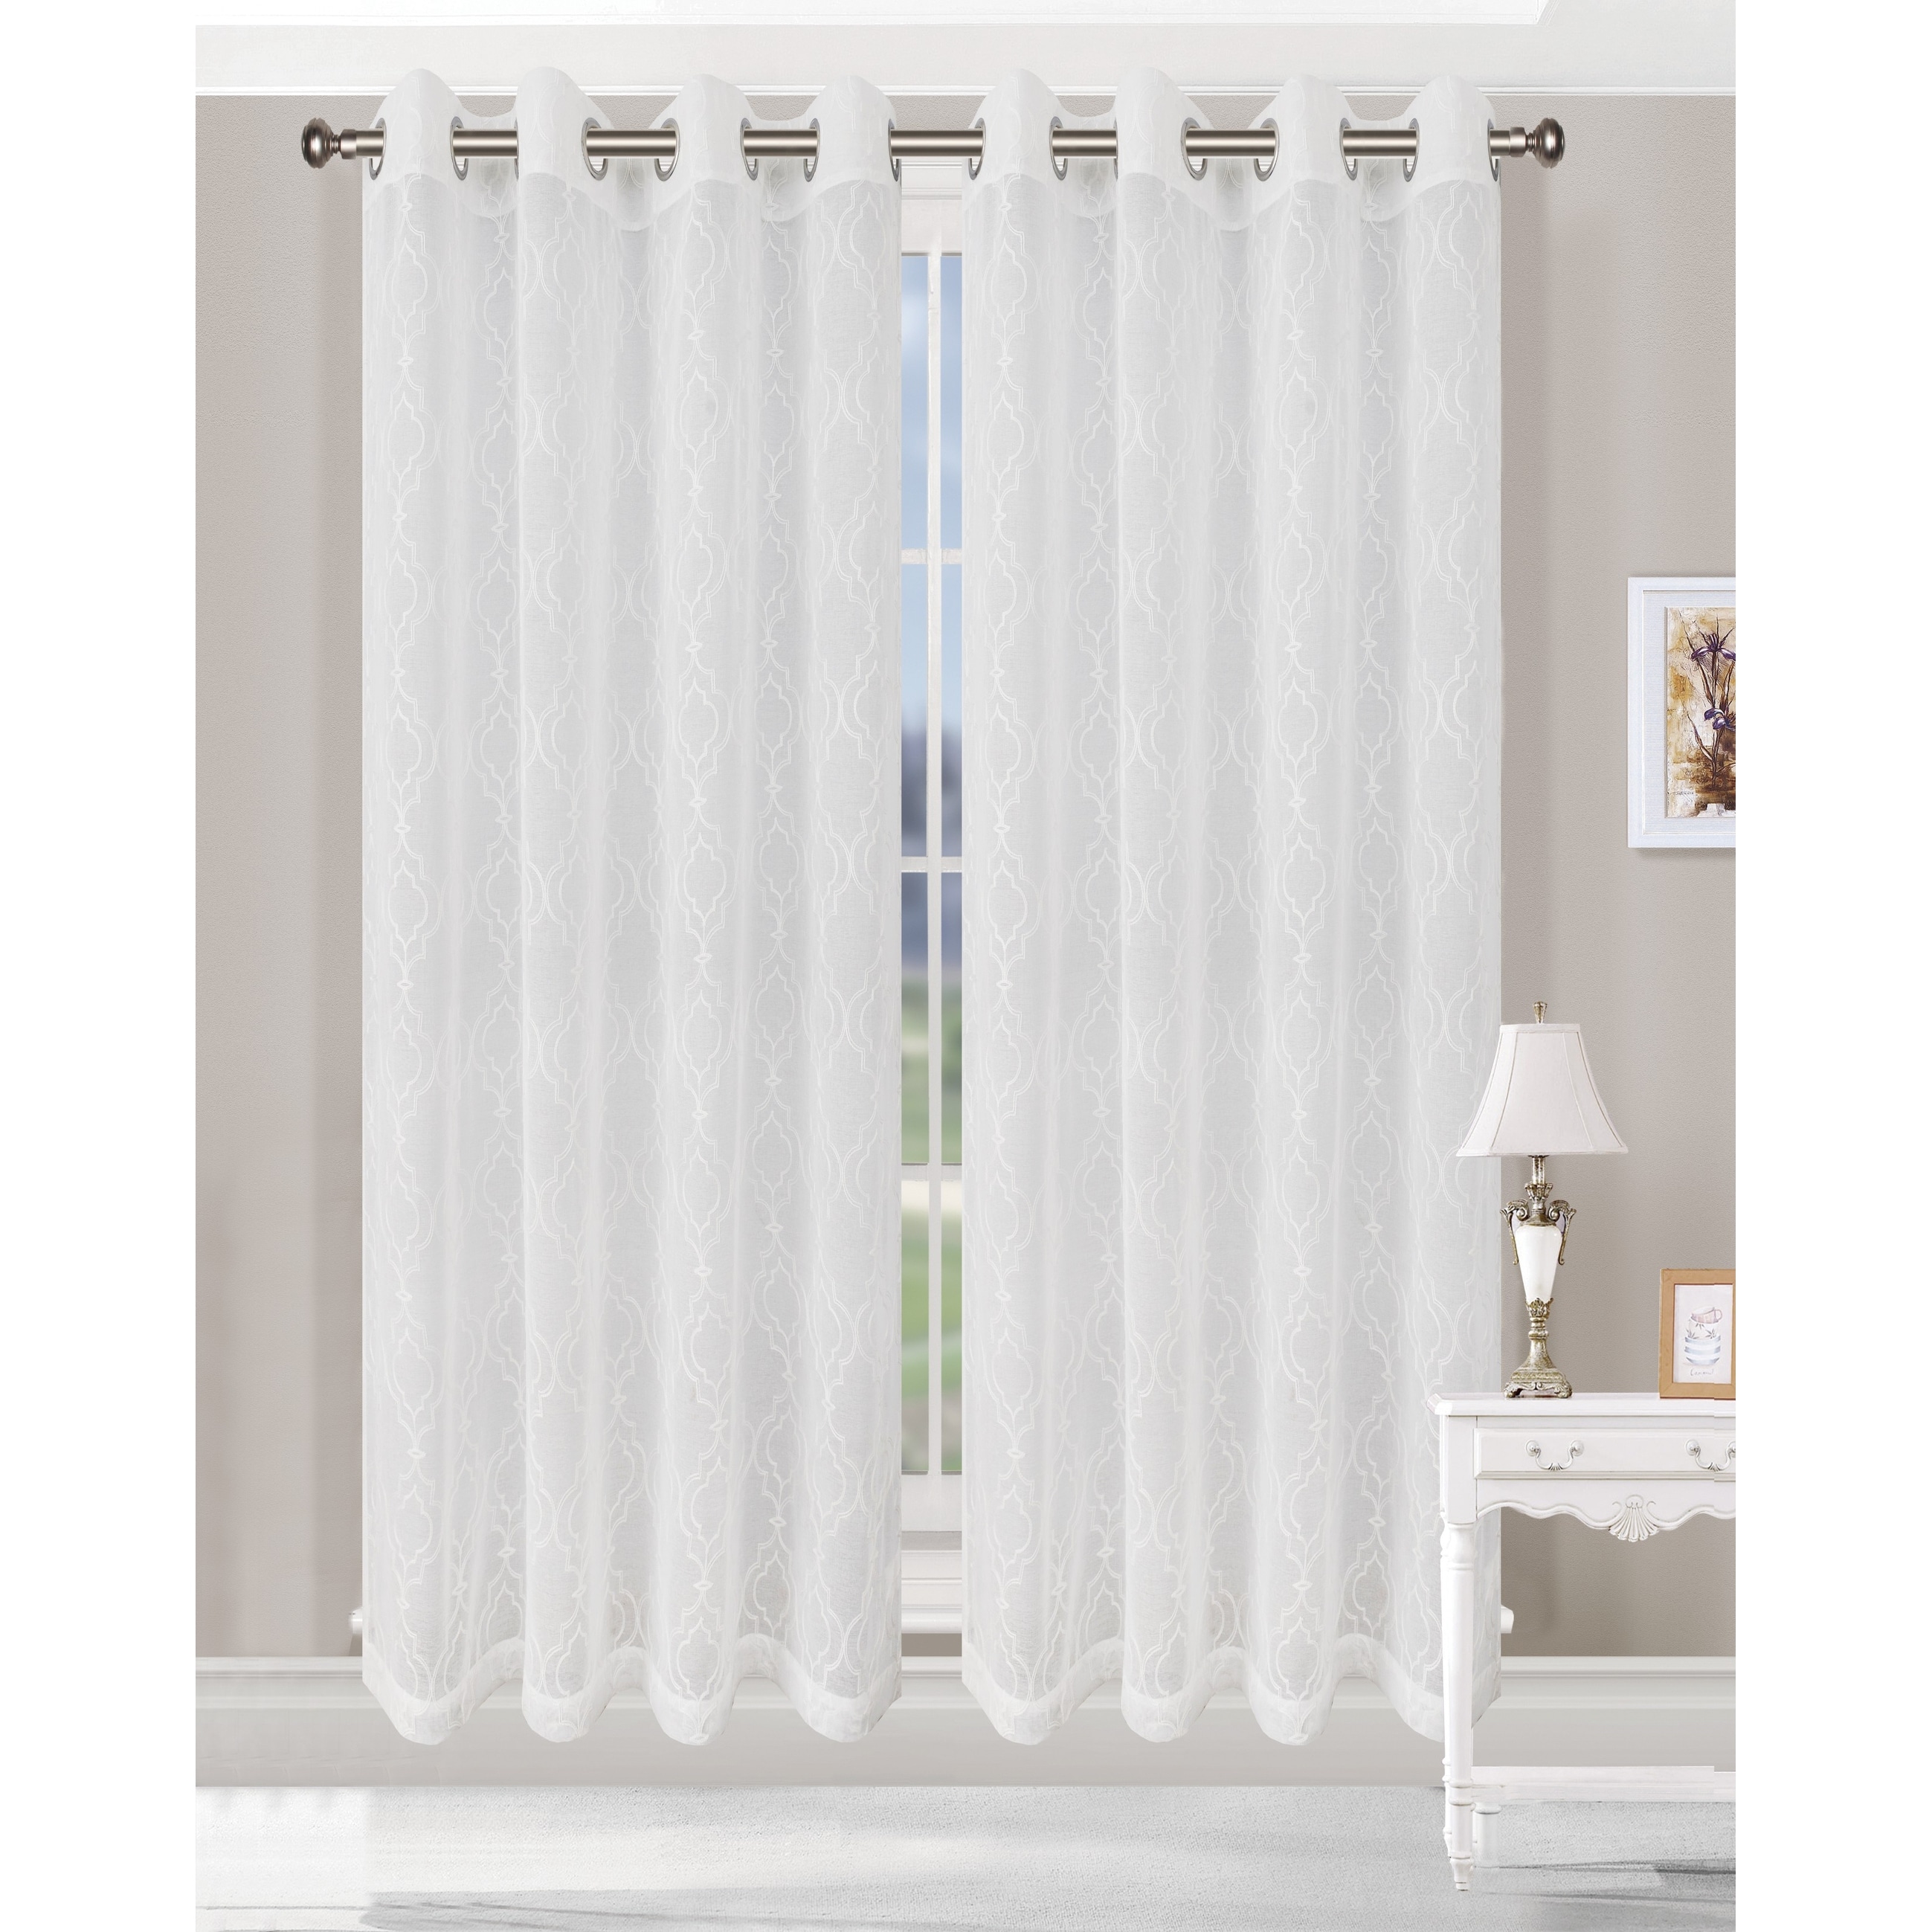 Deconovo White Semi Sheer Curtains with Gray Geometric Pattern, Grommet  Classic Sheer Curtains 52x63 inch, Voile Curtains for Bedroom, 2 Panels